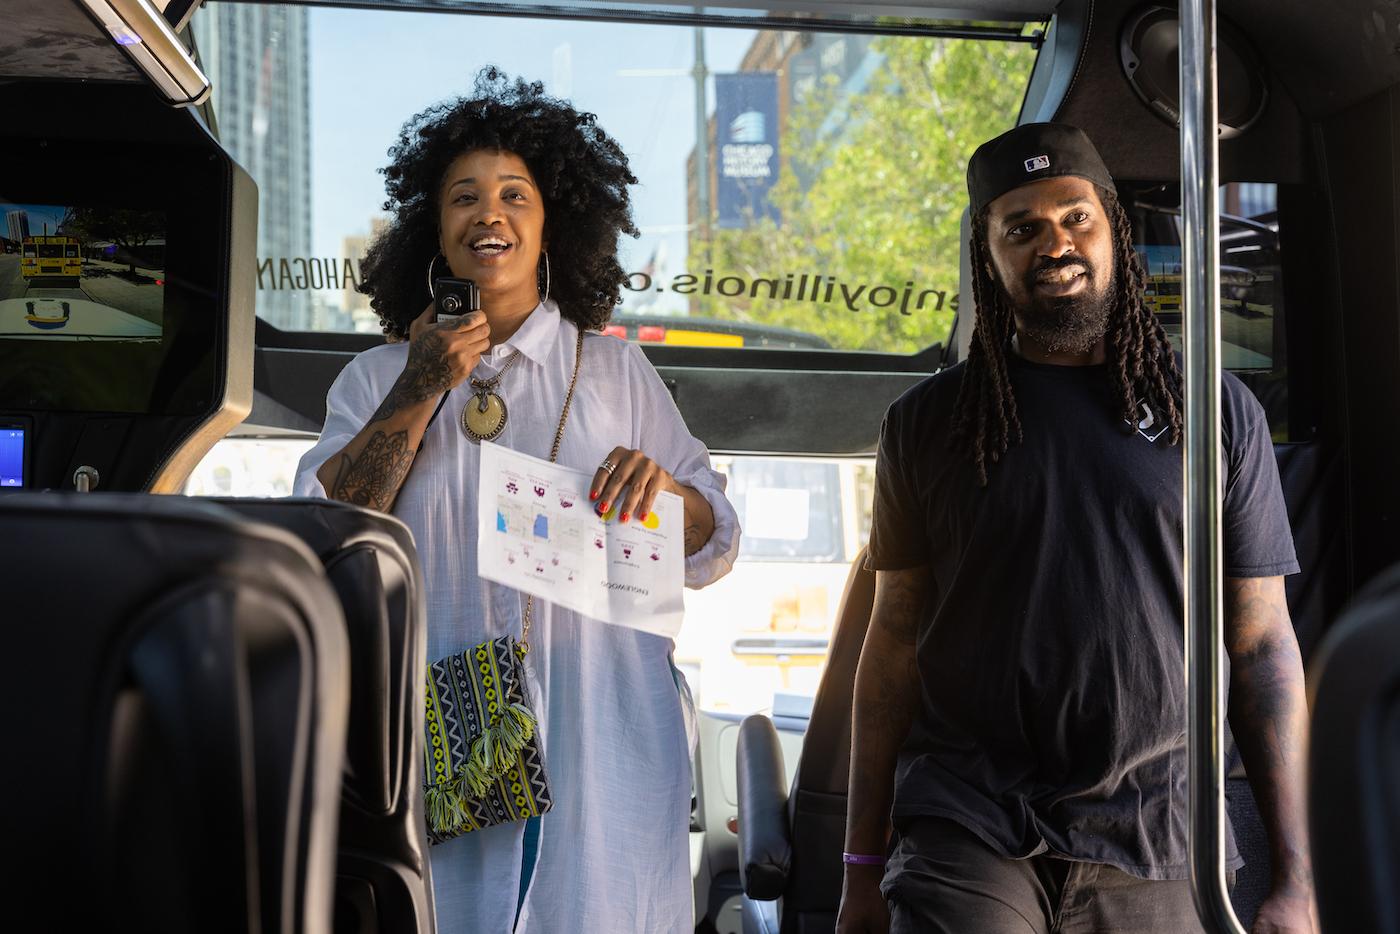 Tonika Lewis Johnson and Shermann "Dilla" Thomas stand at the front of a tour bus